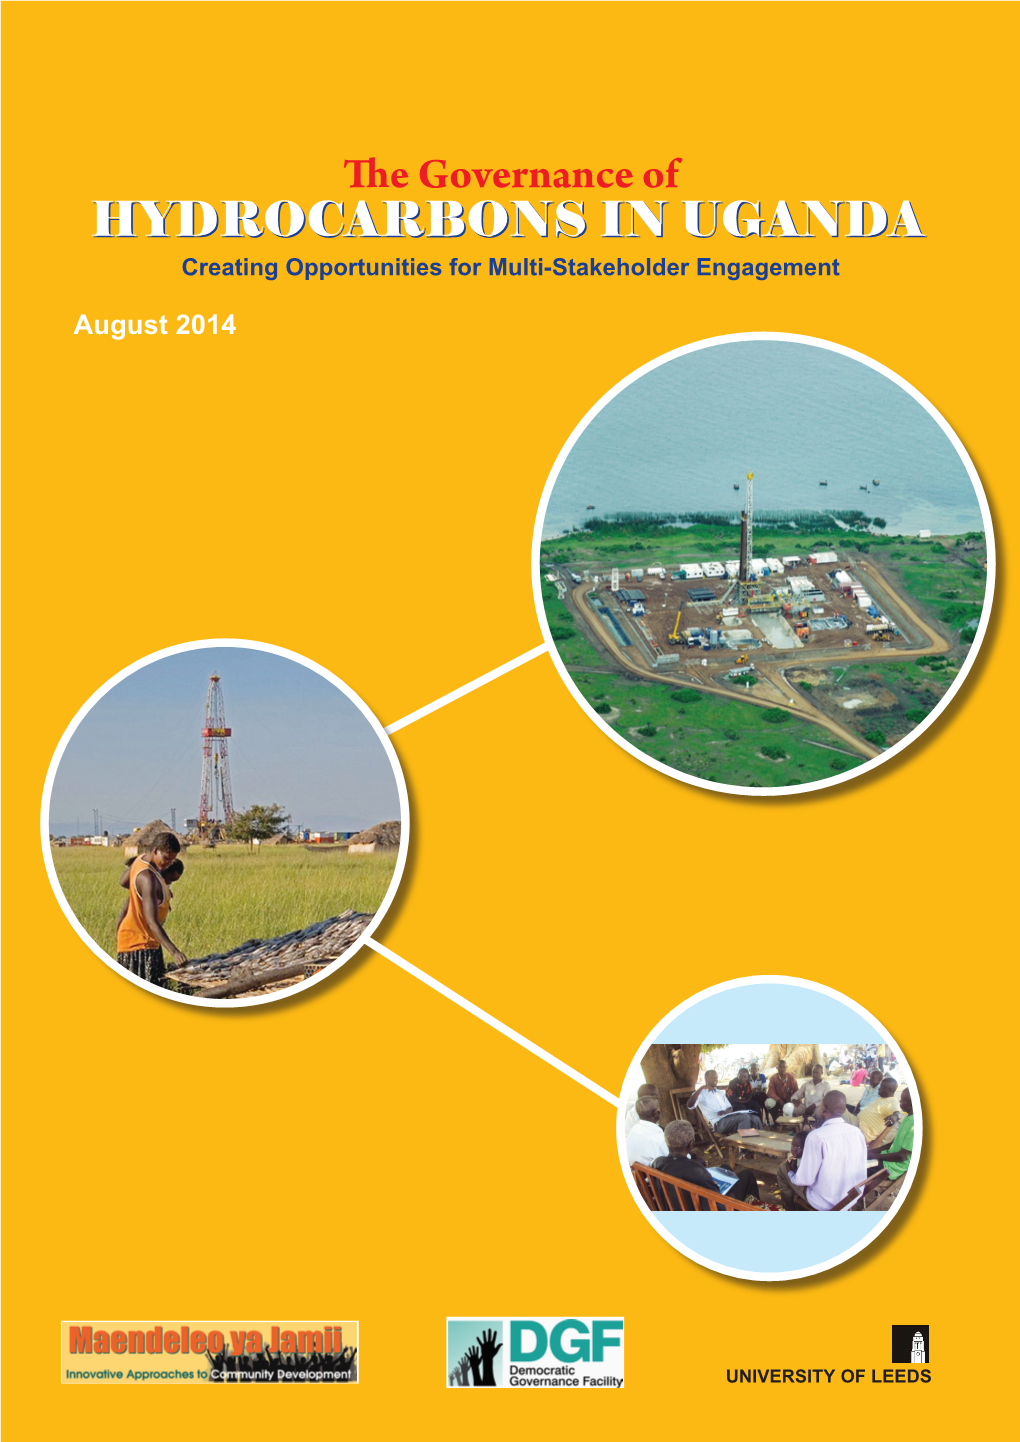 The Governance of HYDROCARBONS in UGANDA Creating Opportunities for Multi-Stakeholder Engagement